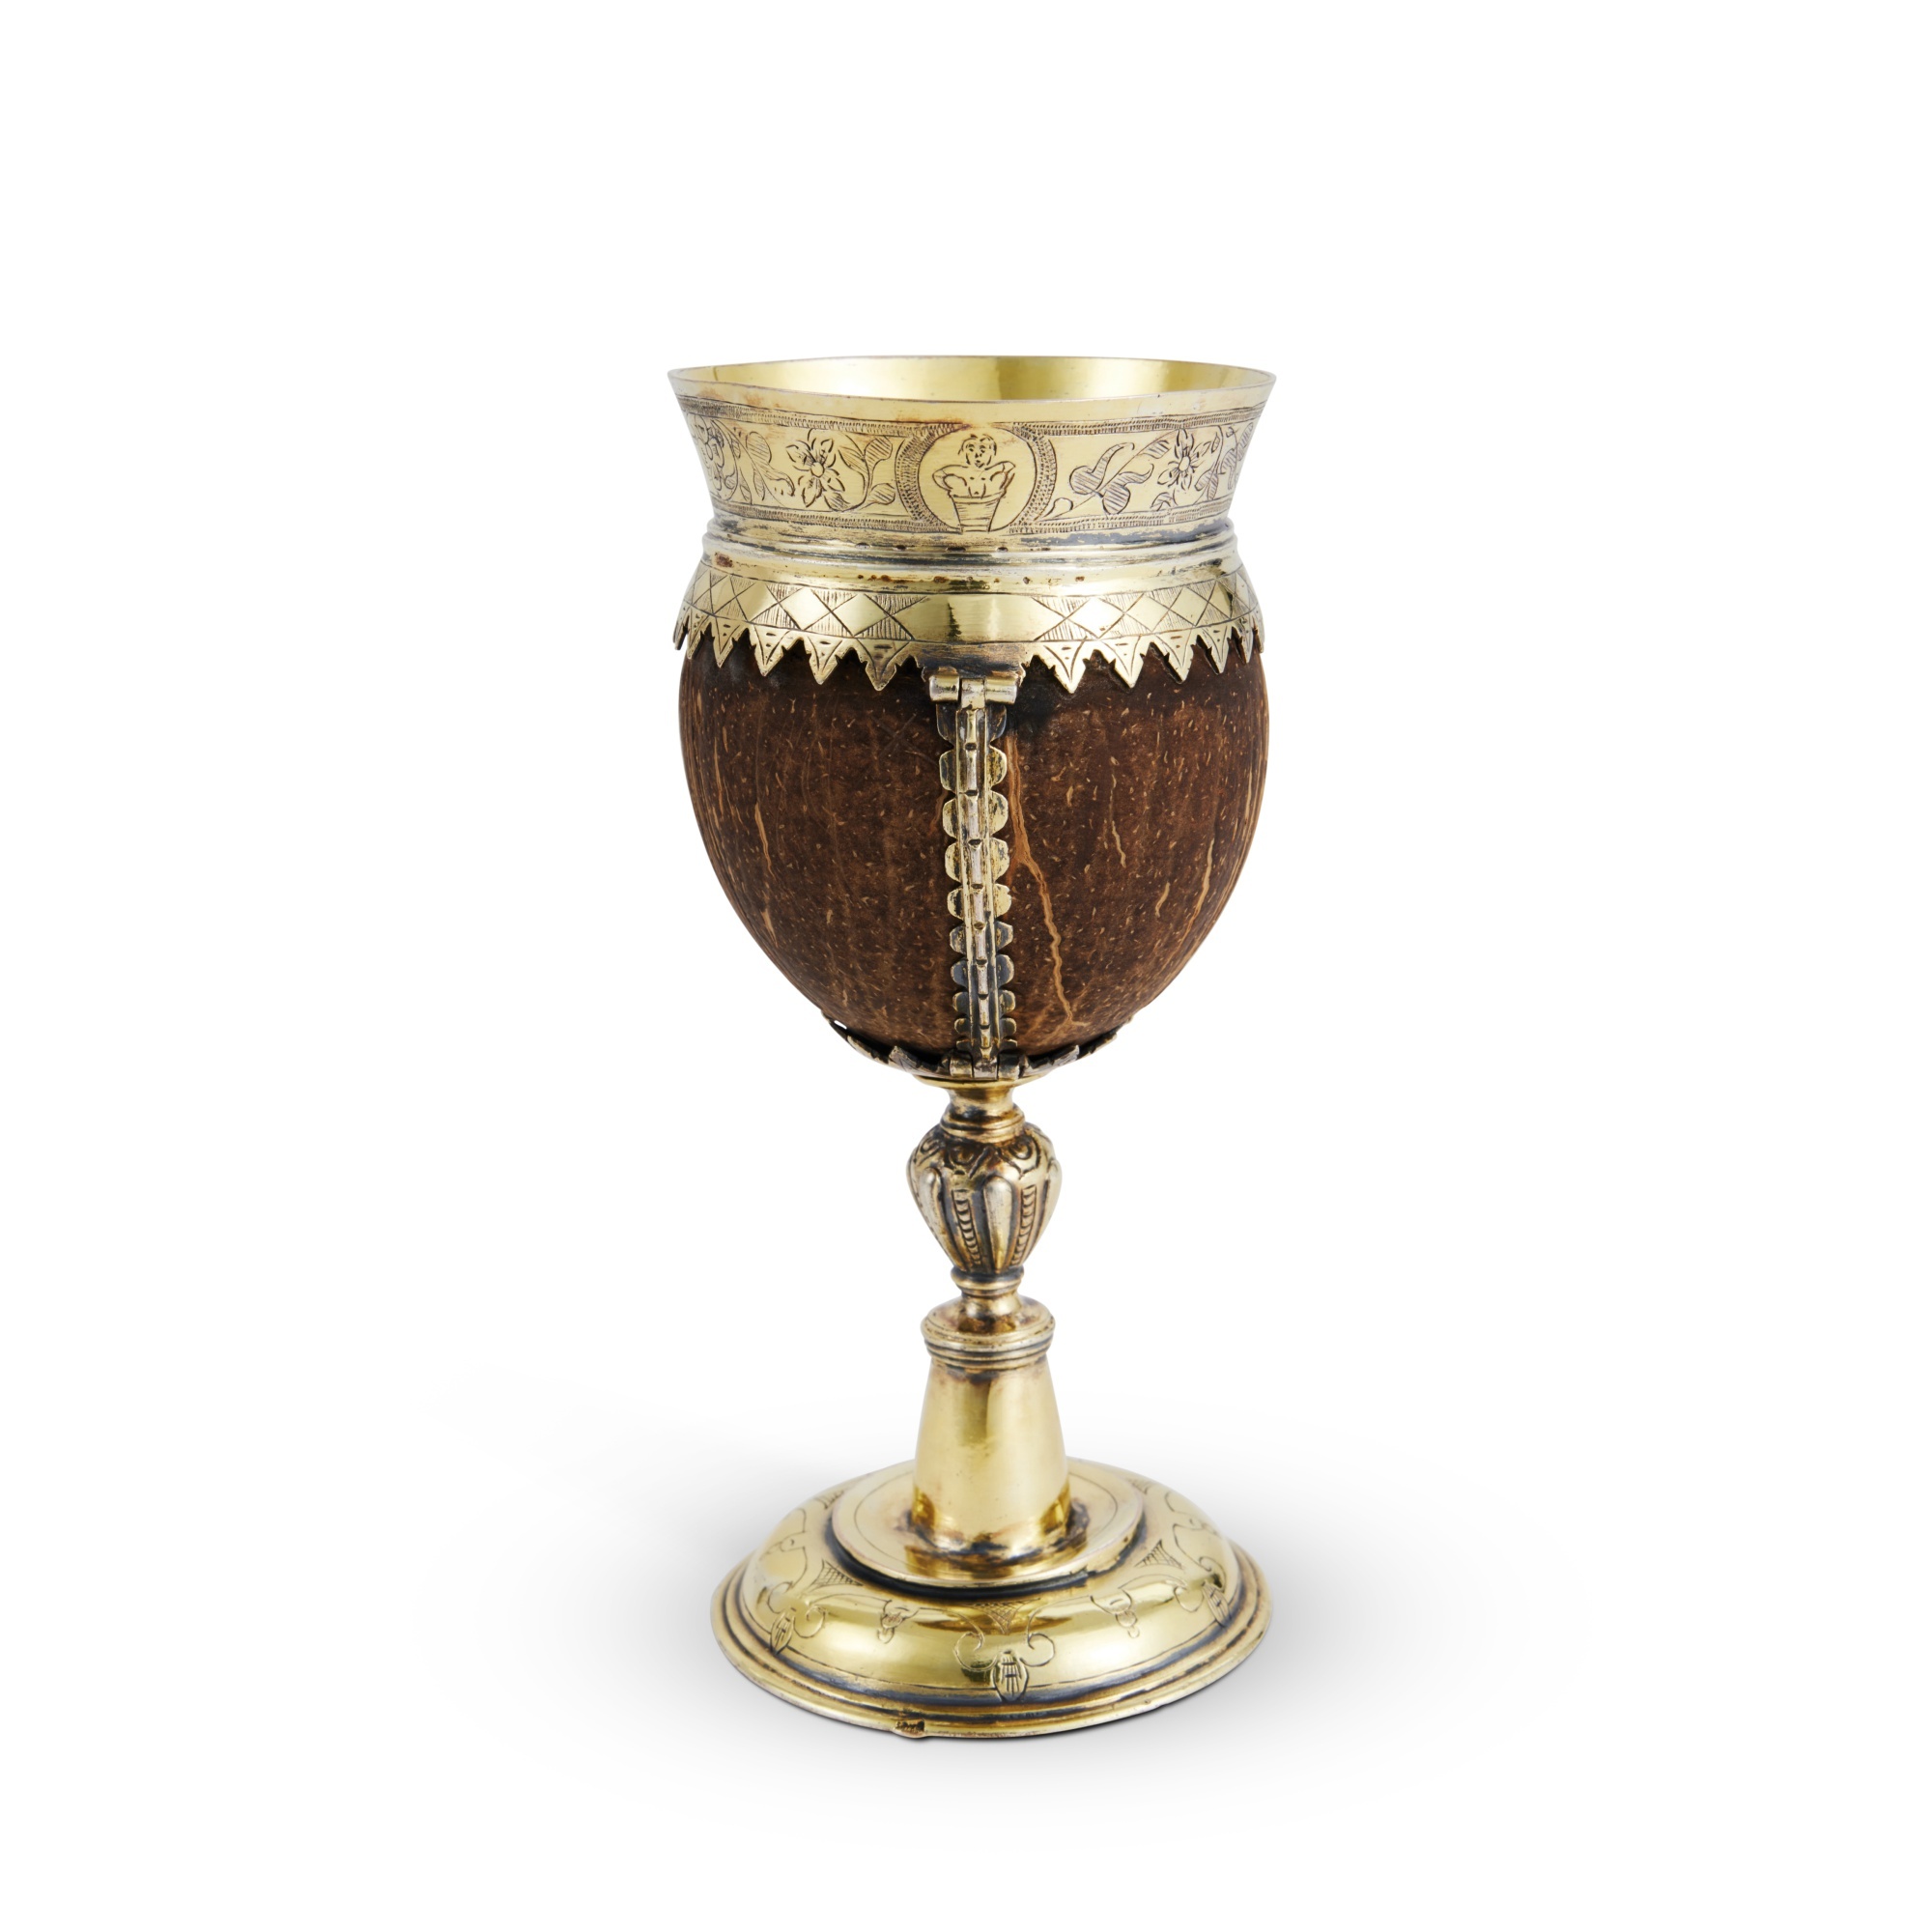 A Silver-Gilt-Mounted Coconut Cup, Probably German, Early 17th Century